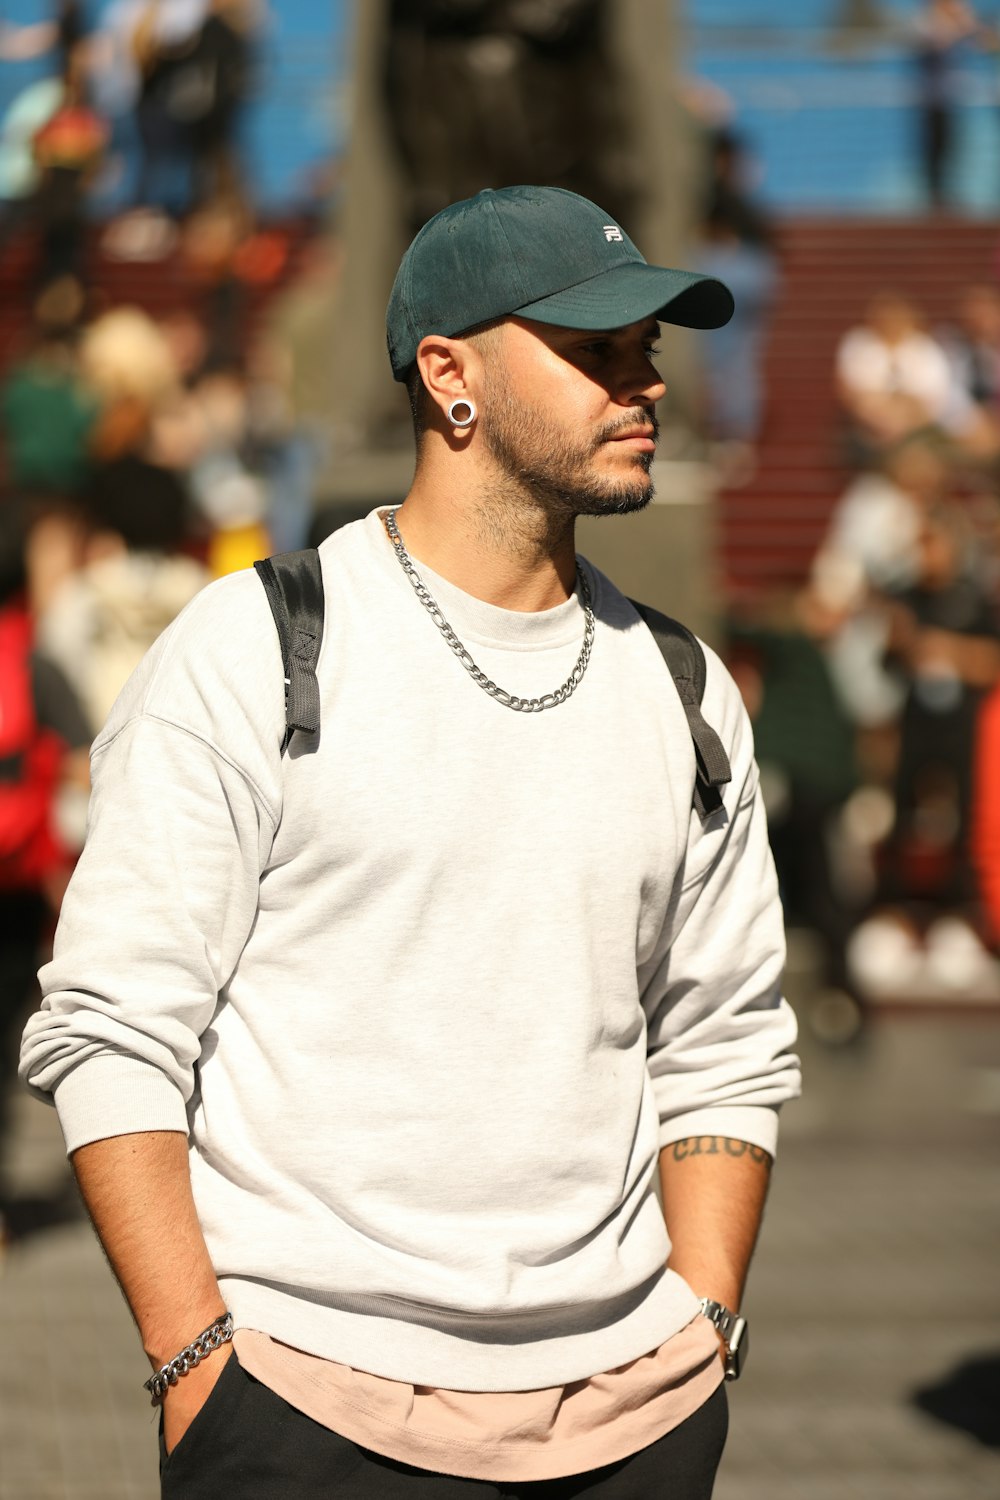 a man with a backpack and a baseball cap